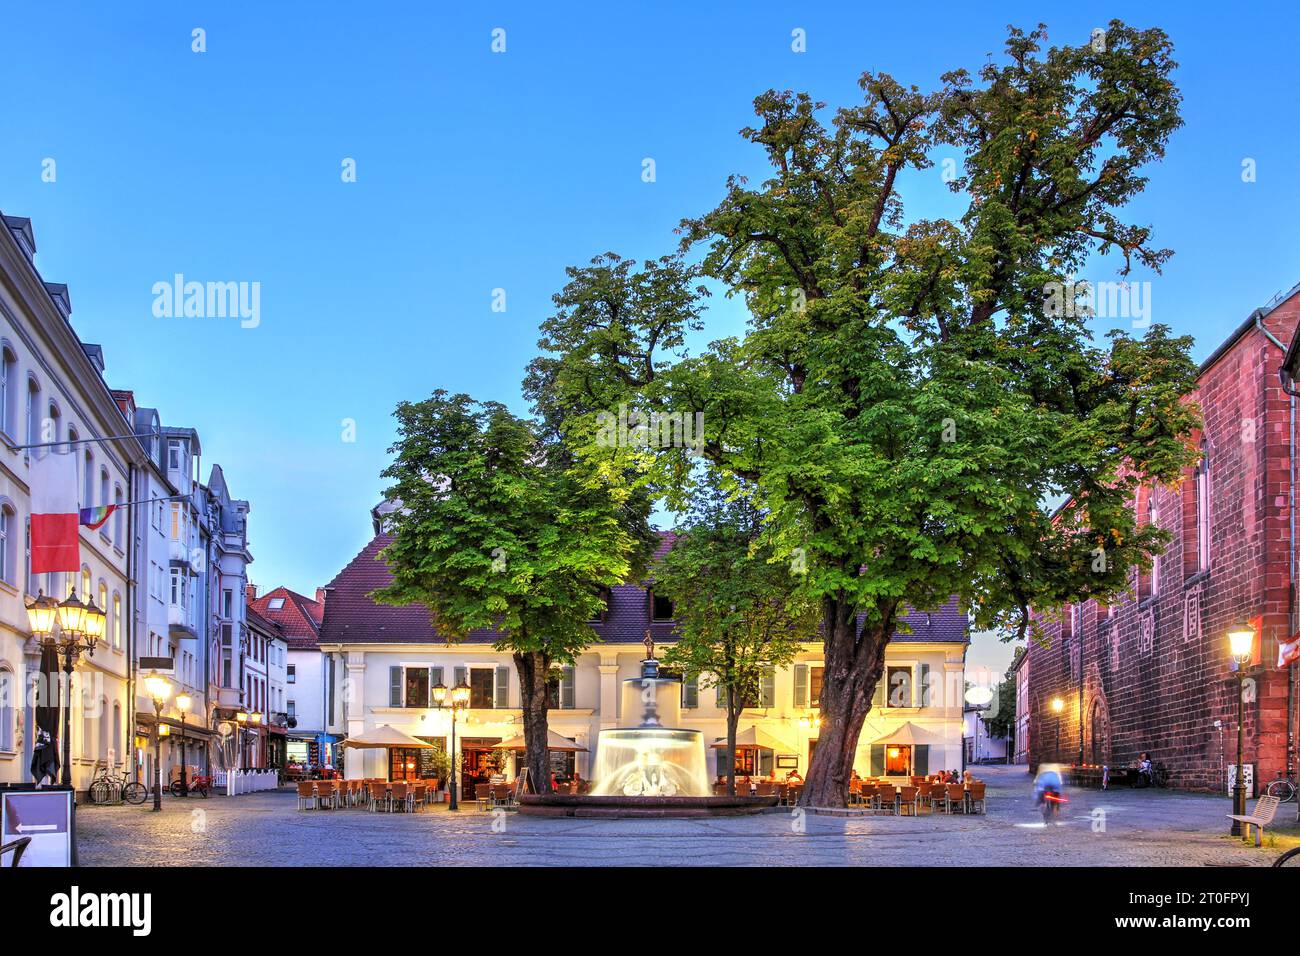 Charming St. Martin's Square in Kaiserslautern, Germany at night. The square remained mostly untouched by the World War II, and feature a beautiful fo Stock Photo